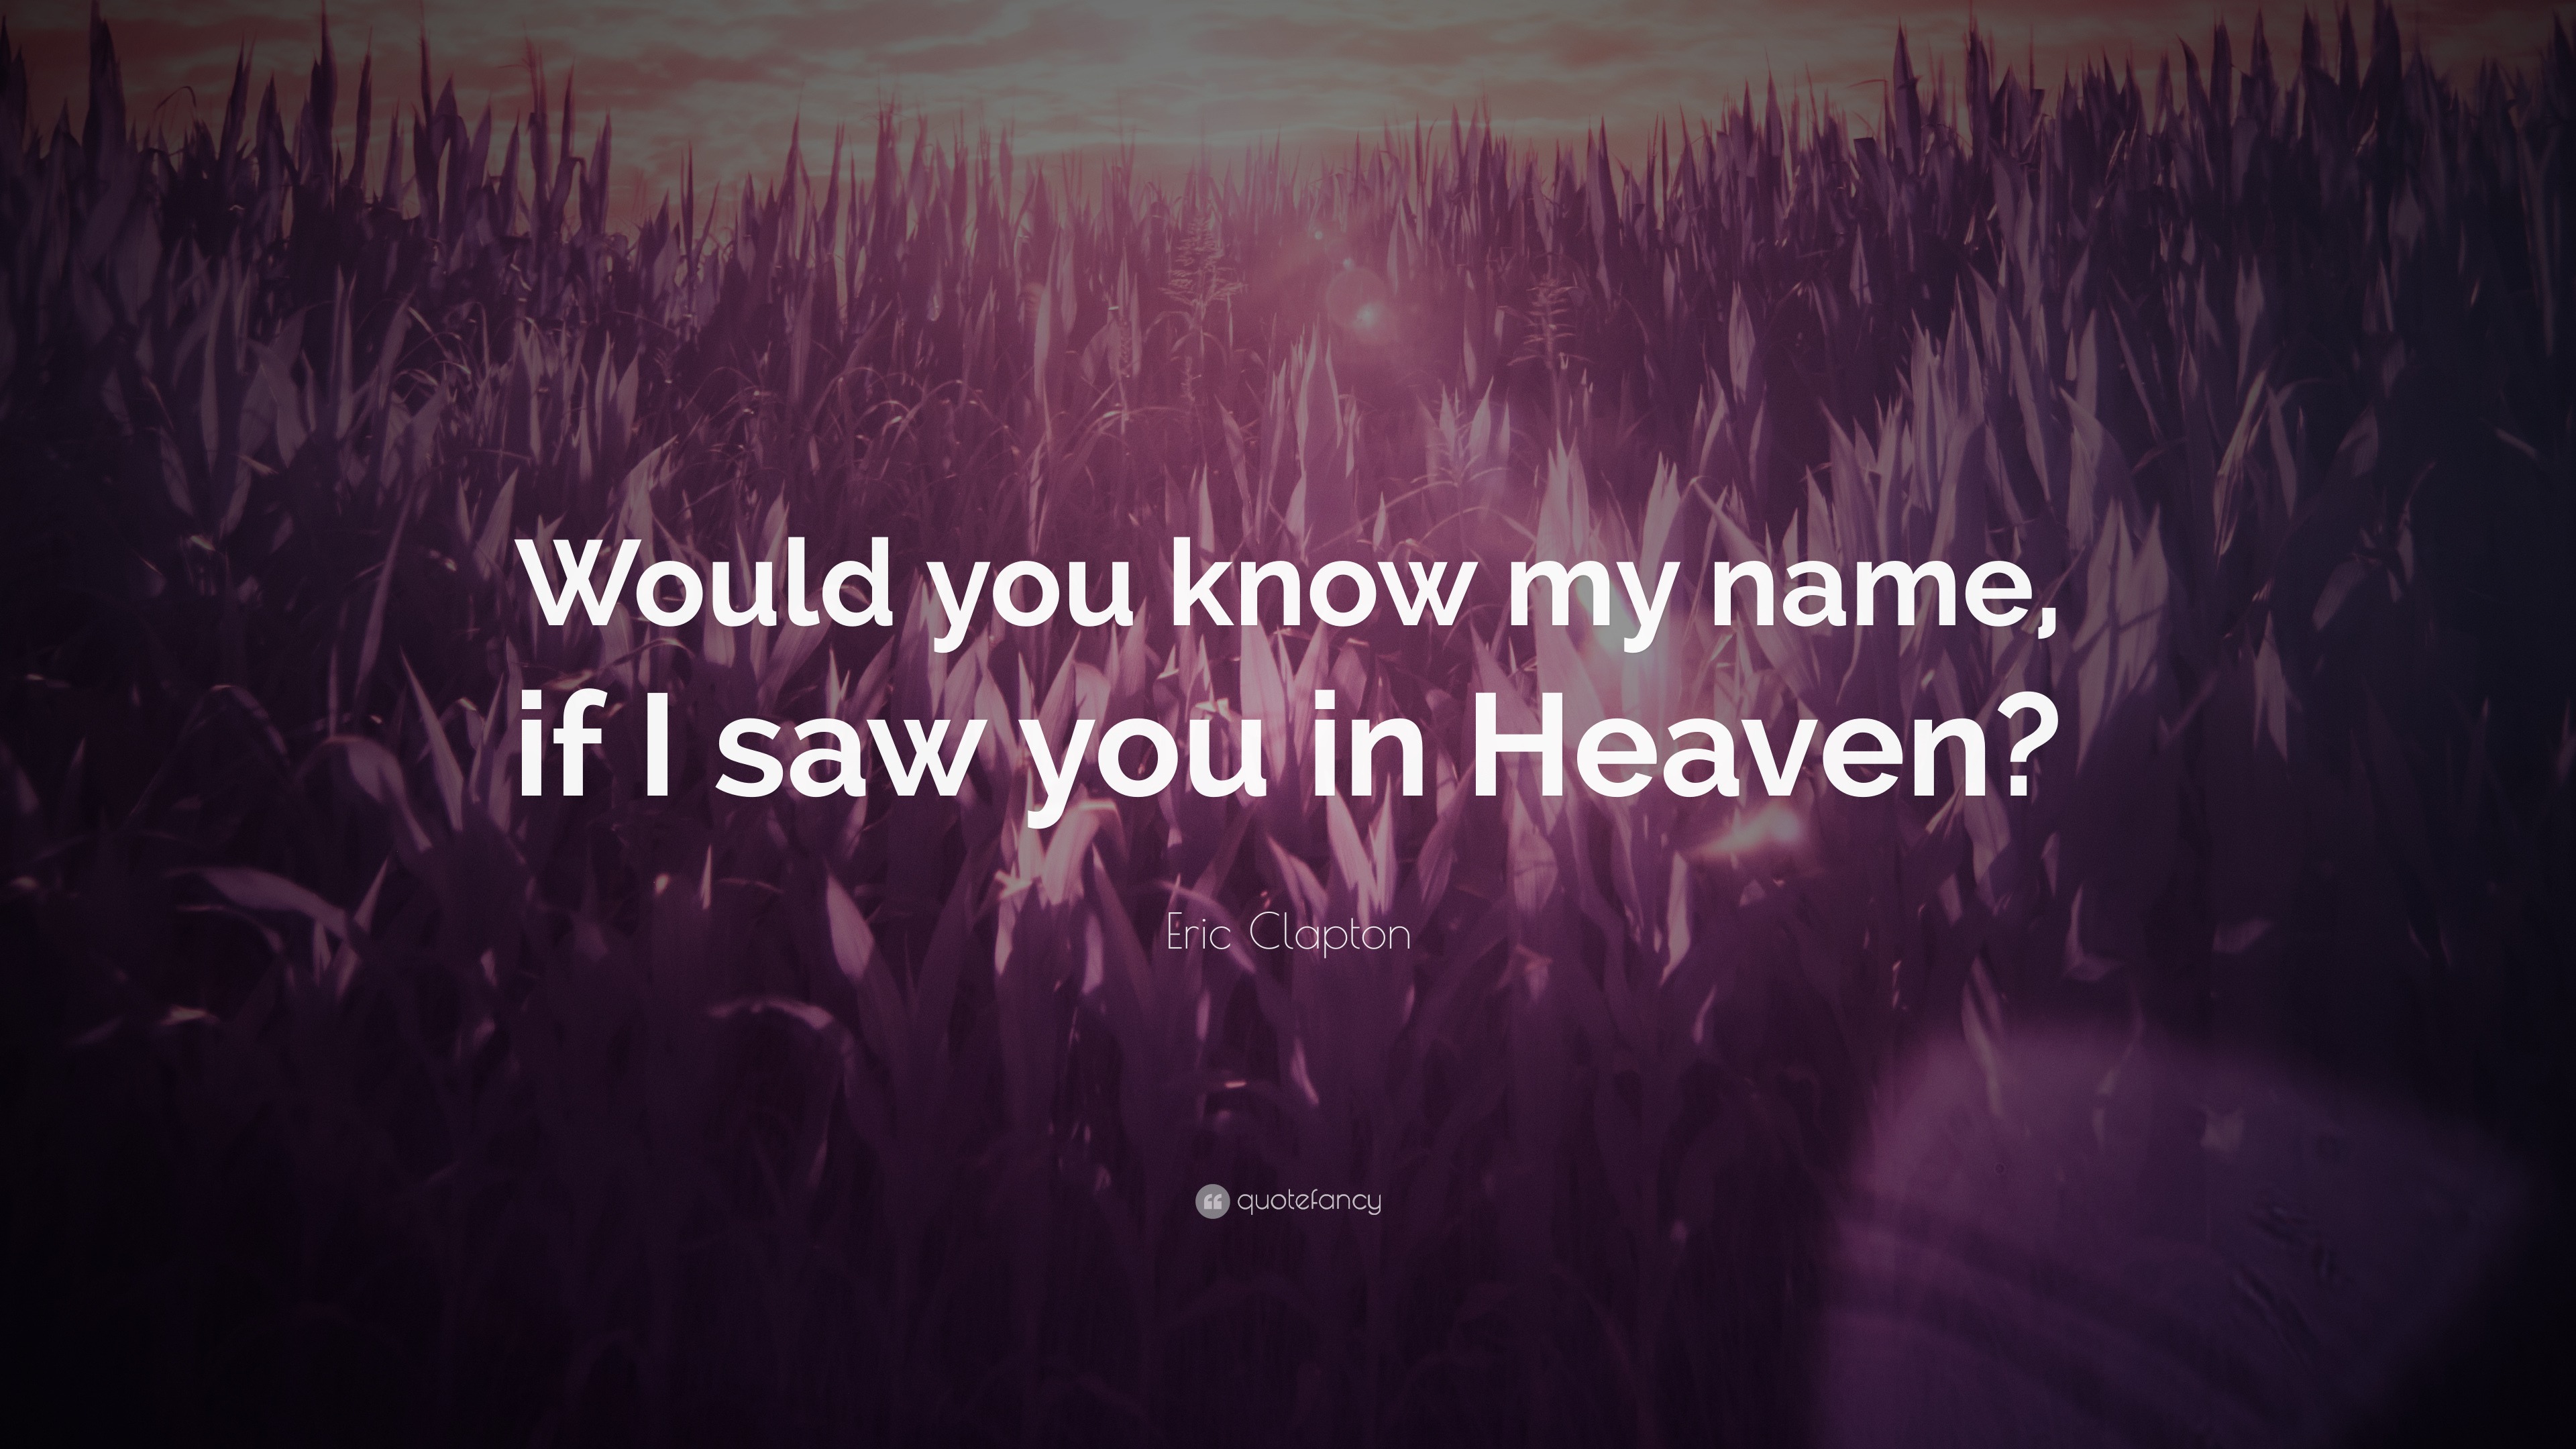 Eric Clapton Quote: “Would you know my name, if I saw you in Heaven?”